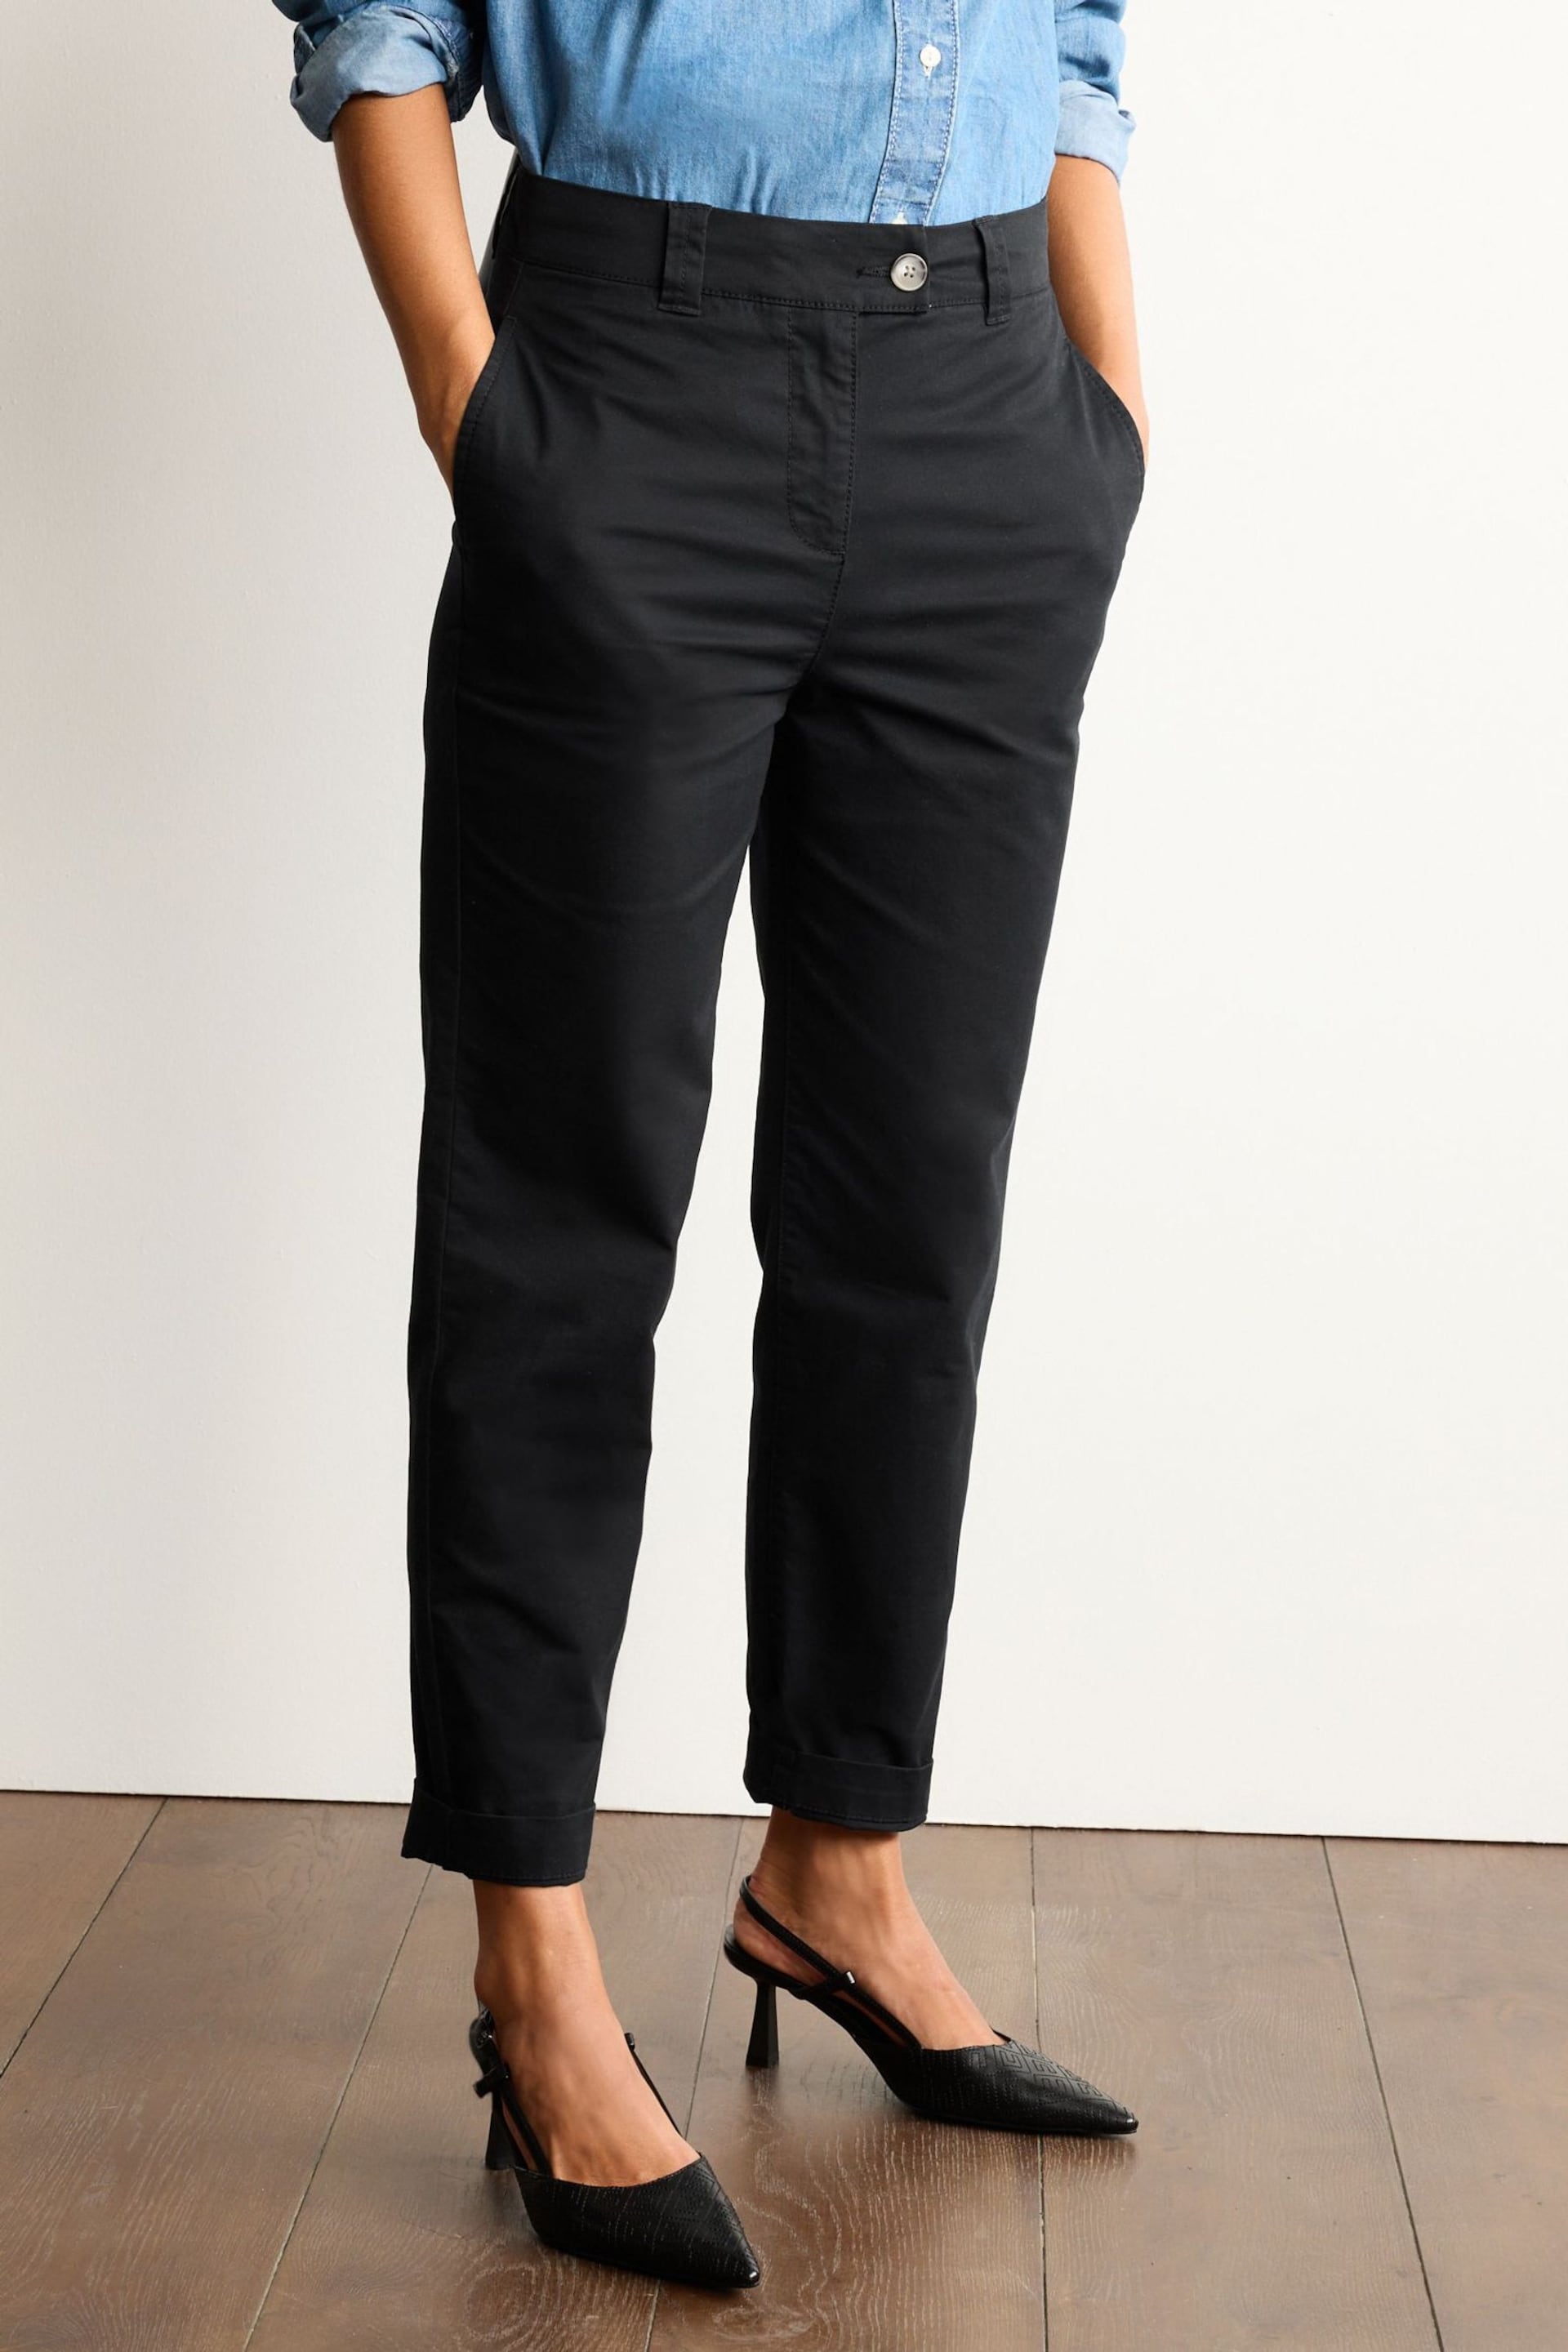 Black The Ultimate Cotton Rich Chino Trousers - Image 4 of 5